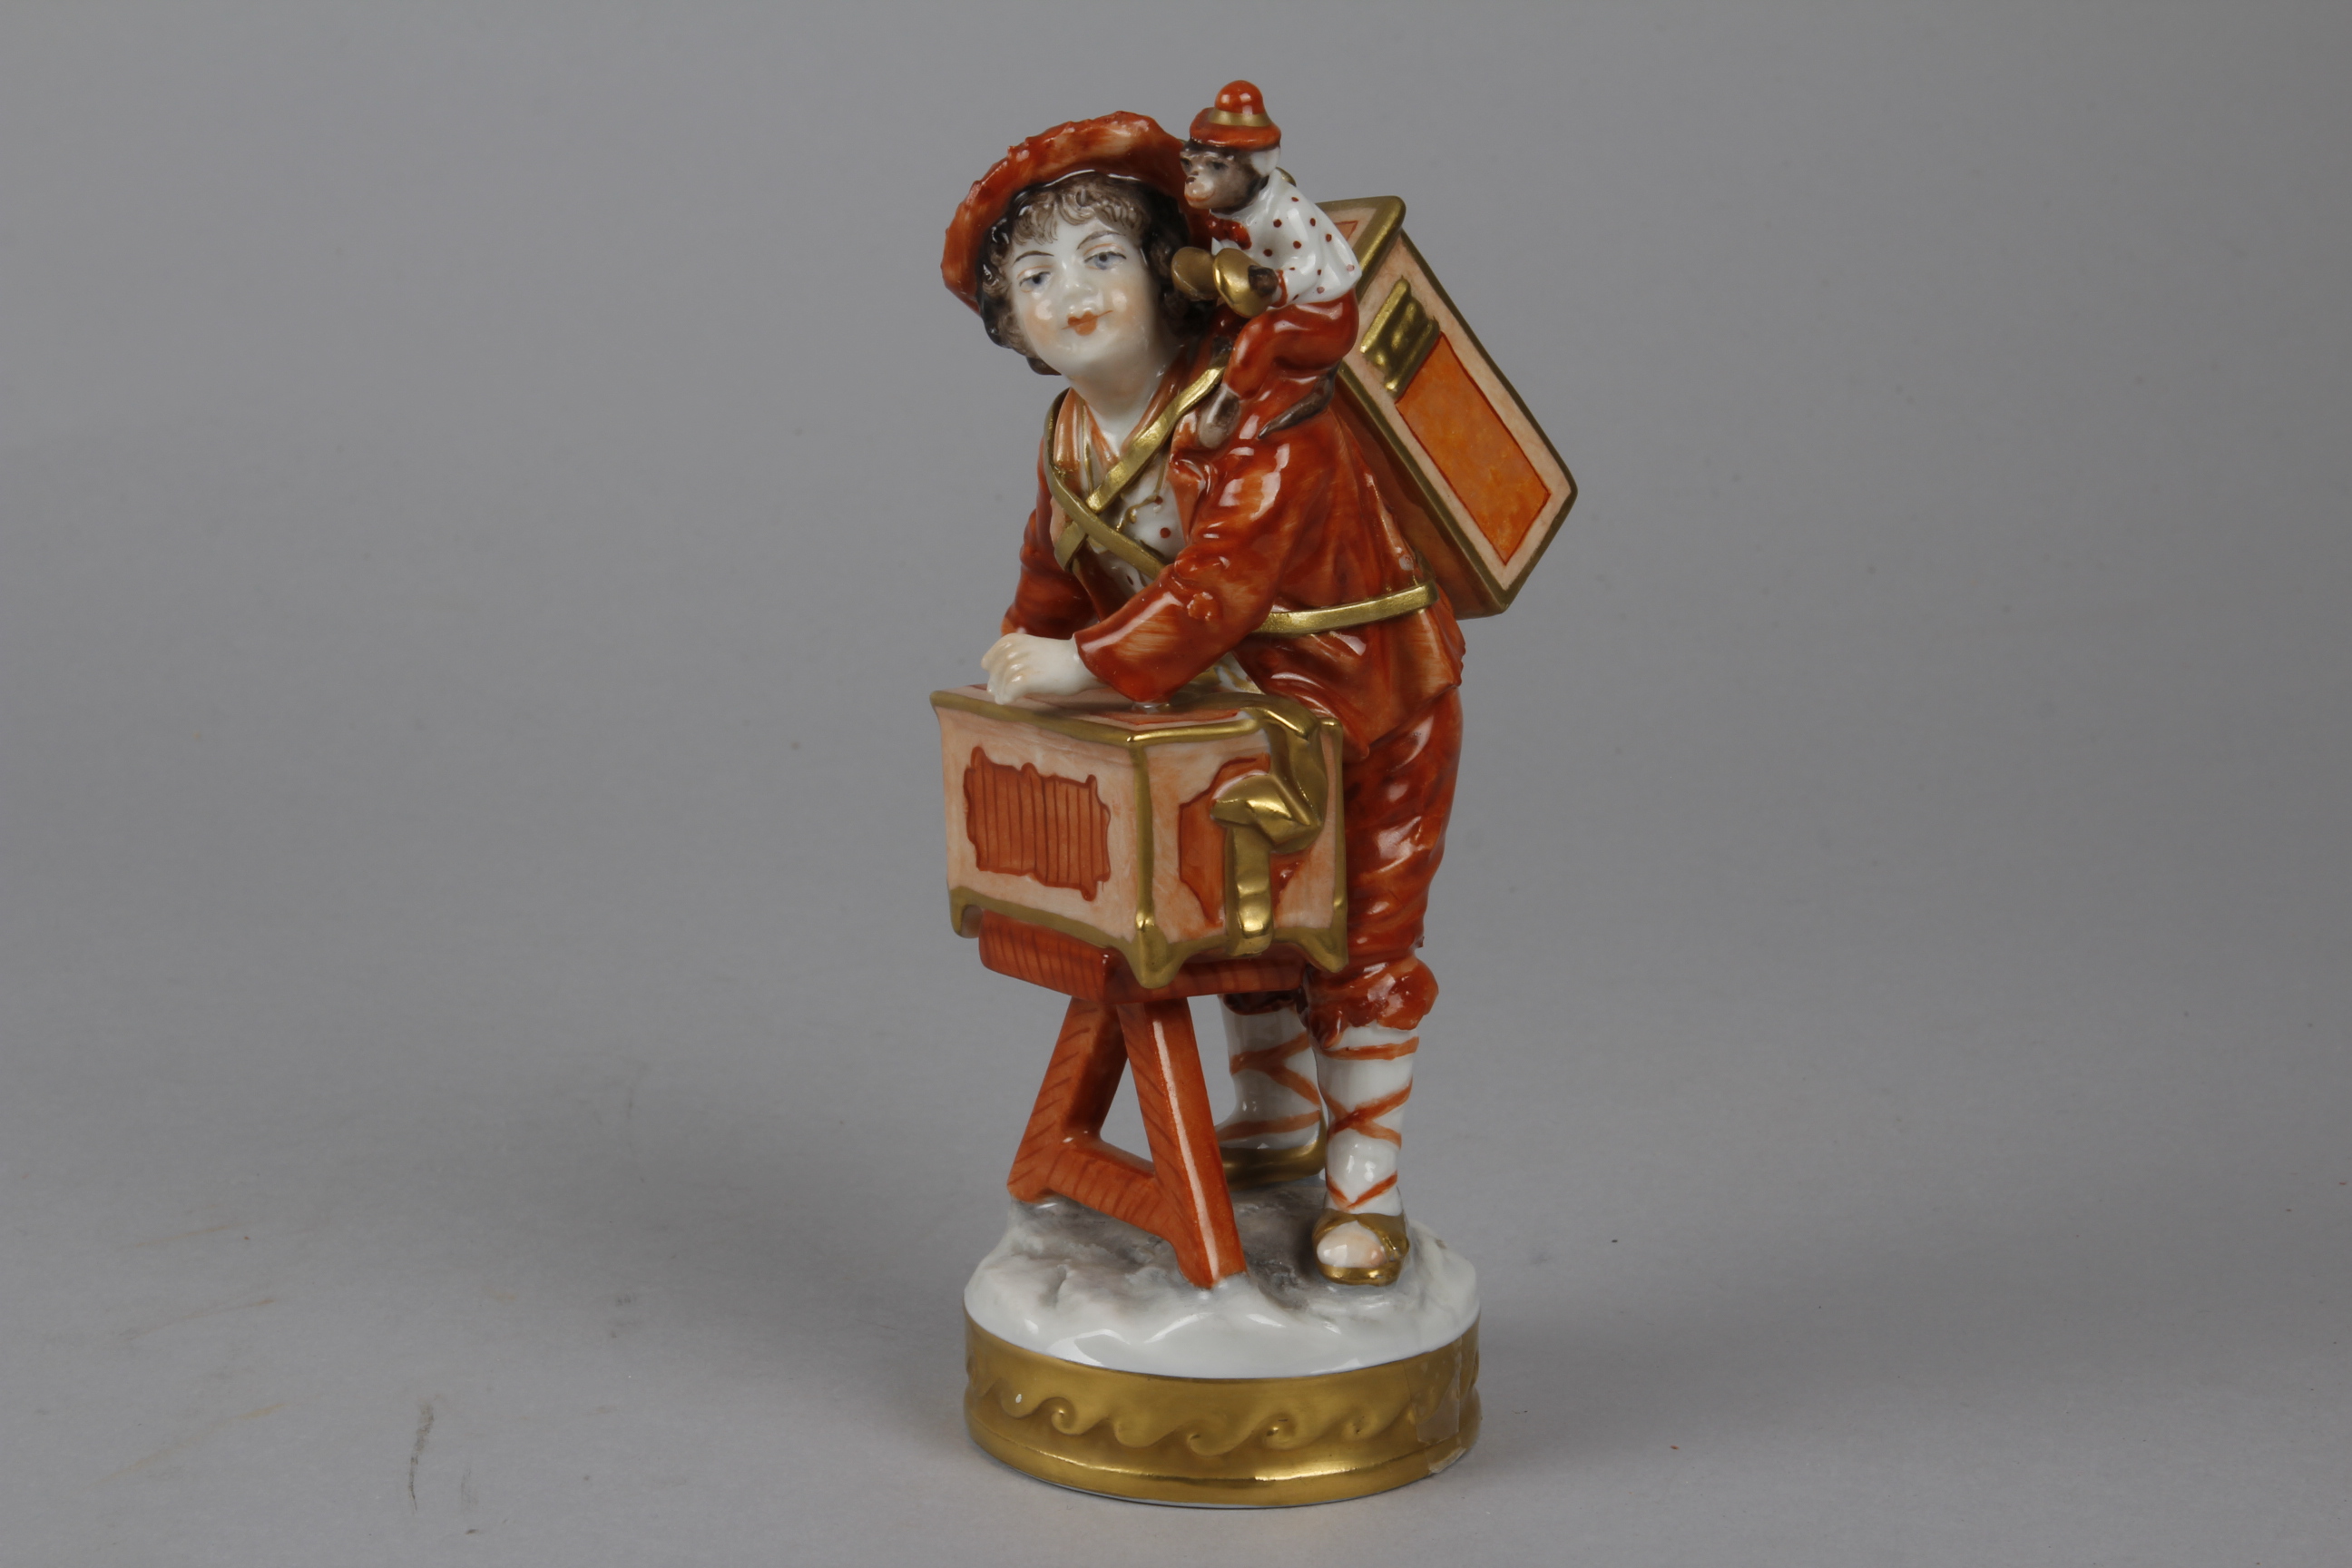 A Continental Porcelain Figurine of an Itinerant Magic Lanternist, the boy with a magic lantern on